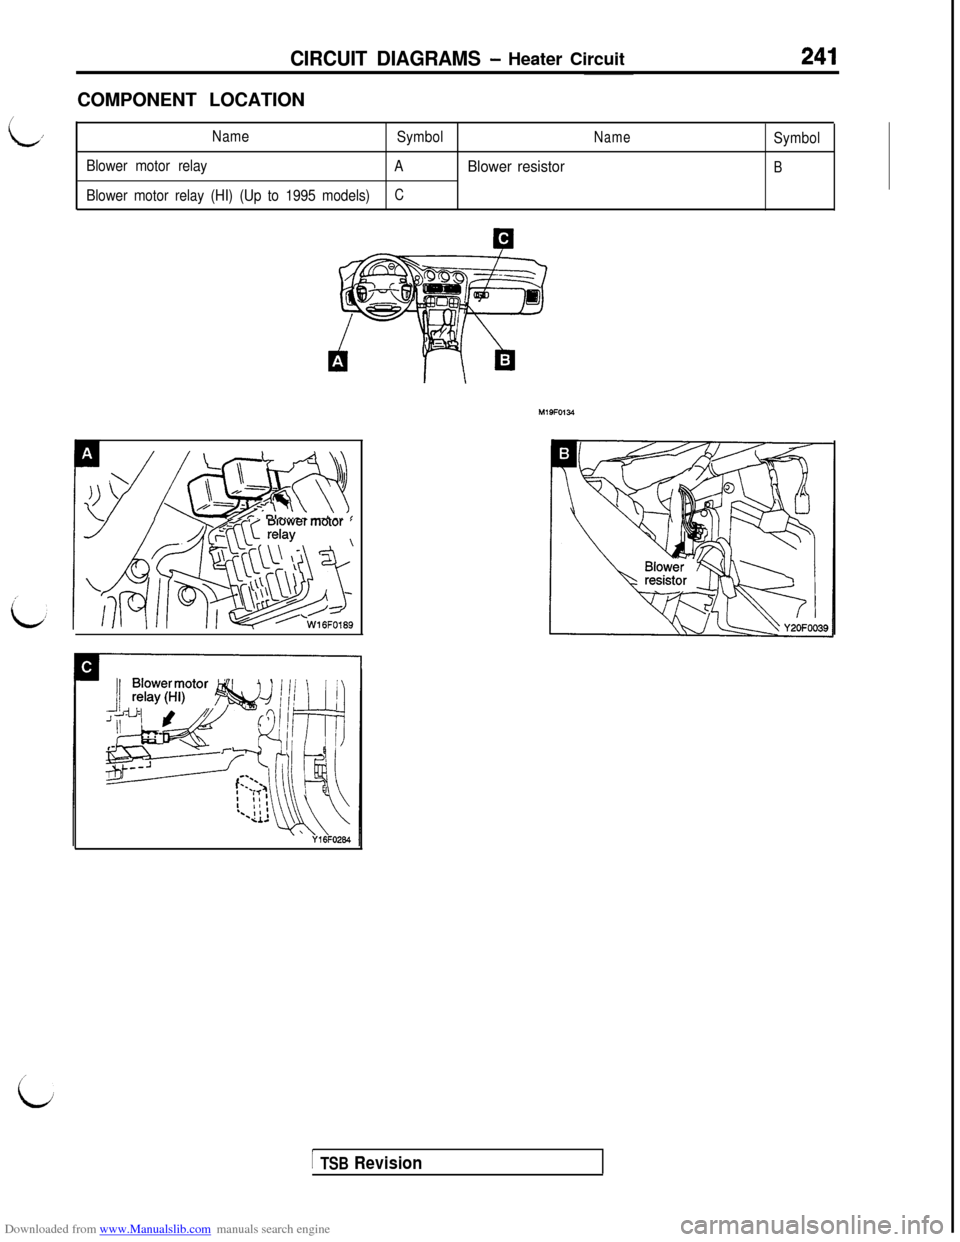 MITSUBISHI 3000GT 1994 2.G Workshop Manual Downloaded from www.Manualslib.com manuals search engine CIRCUIT DIAGRAMS - Heater CircuitCOMPONENT LOCATION
,Name
SymbolNameSymbol
Blower motor relay
A
Blower resistorB
Blower motor relay (HI) (Up to